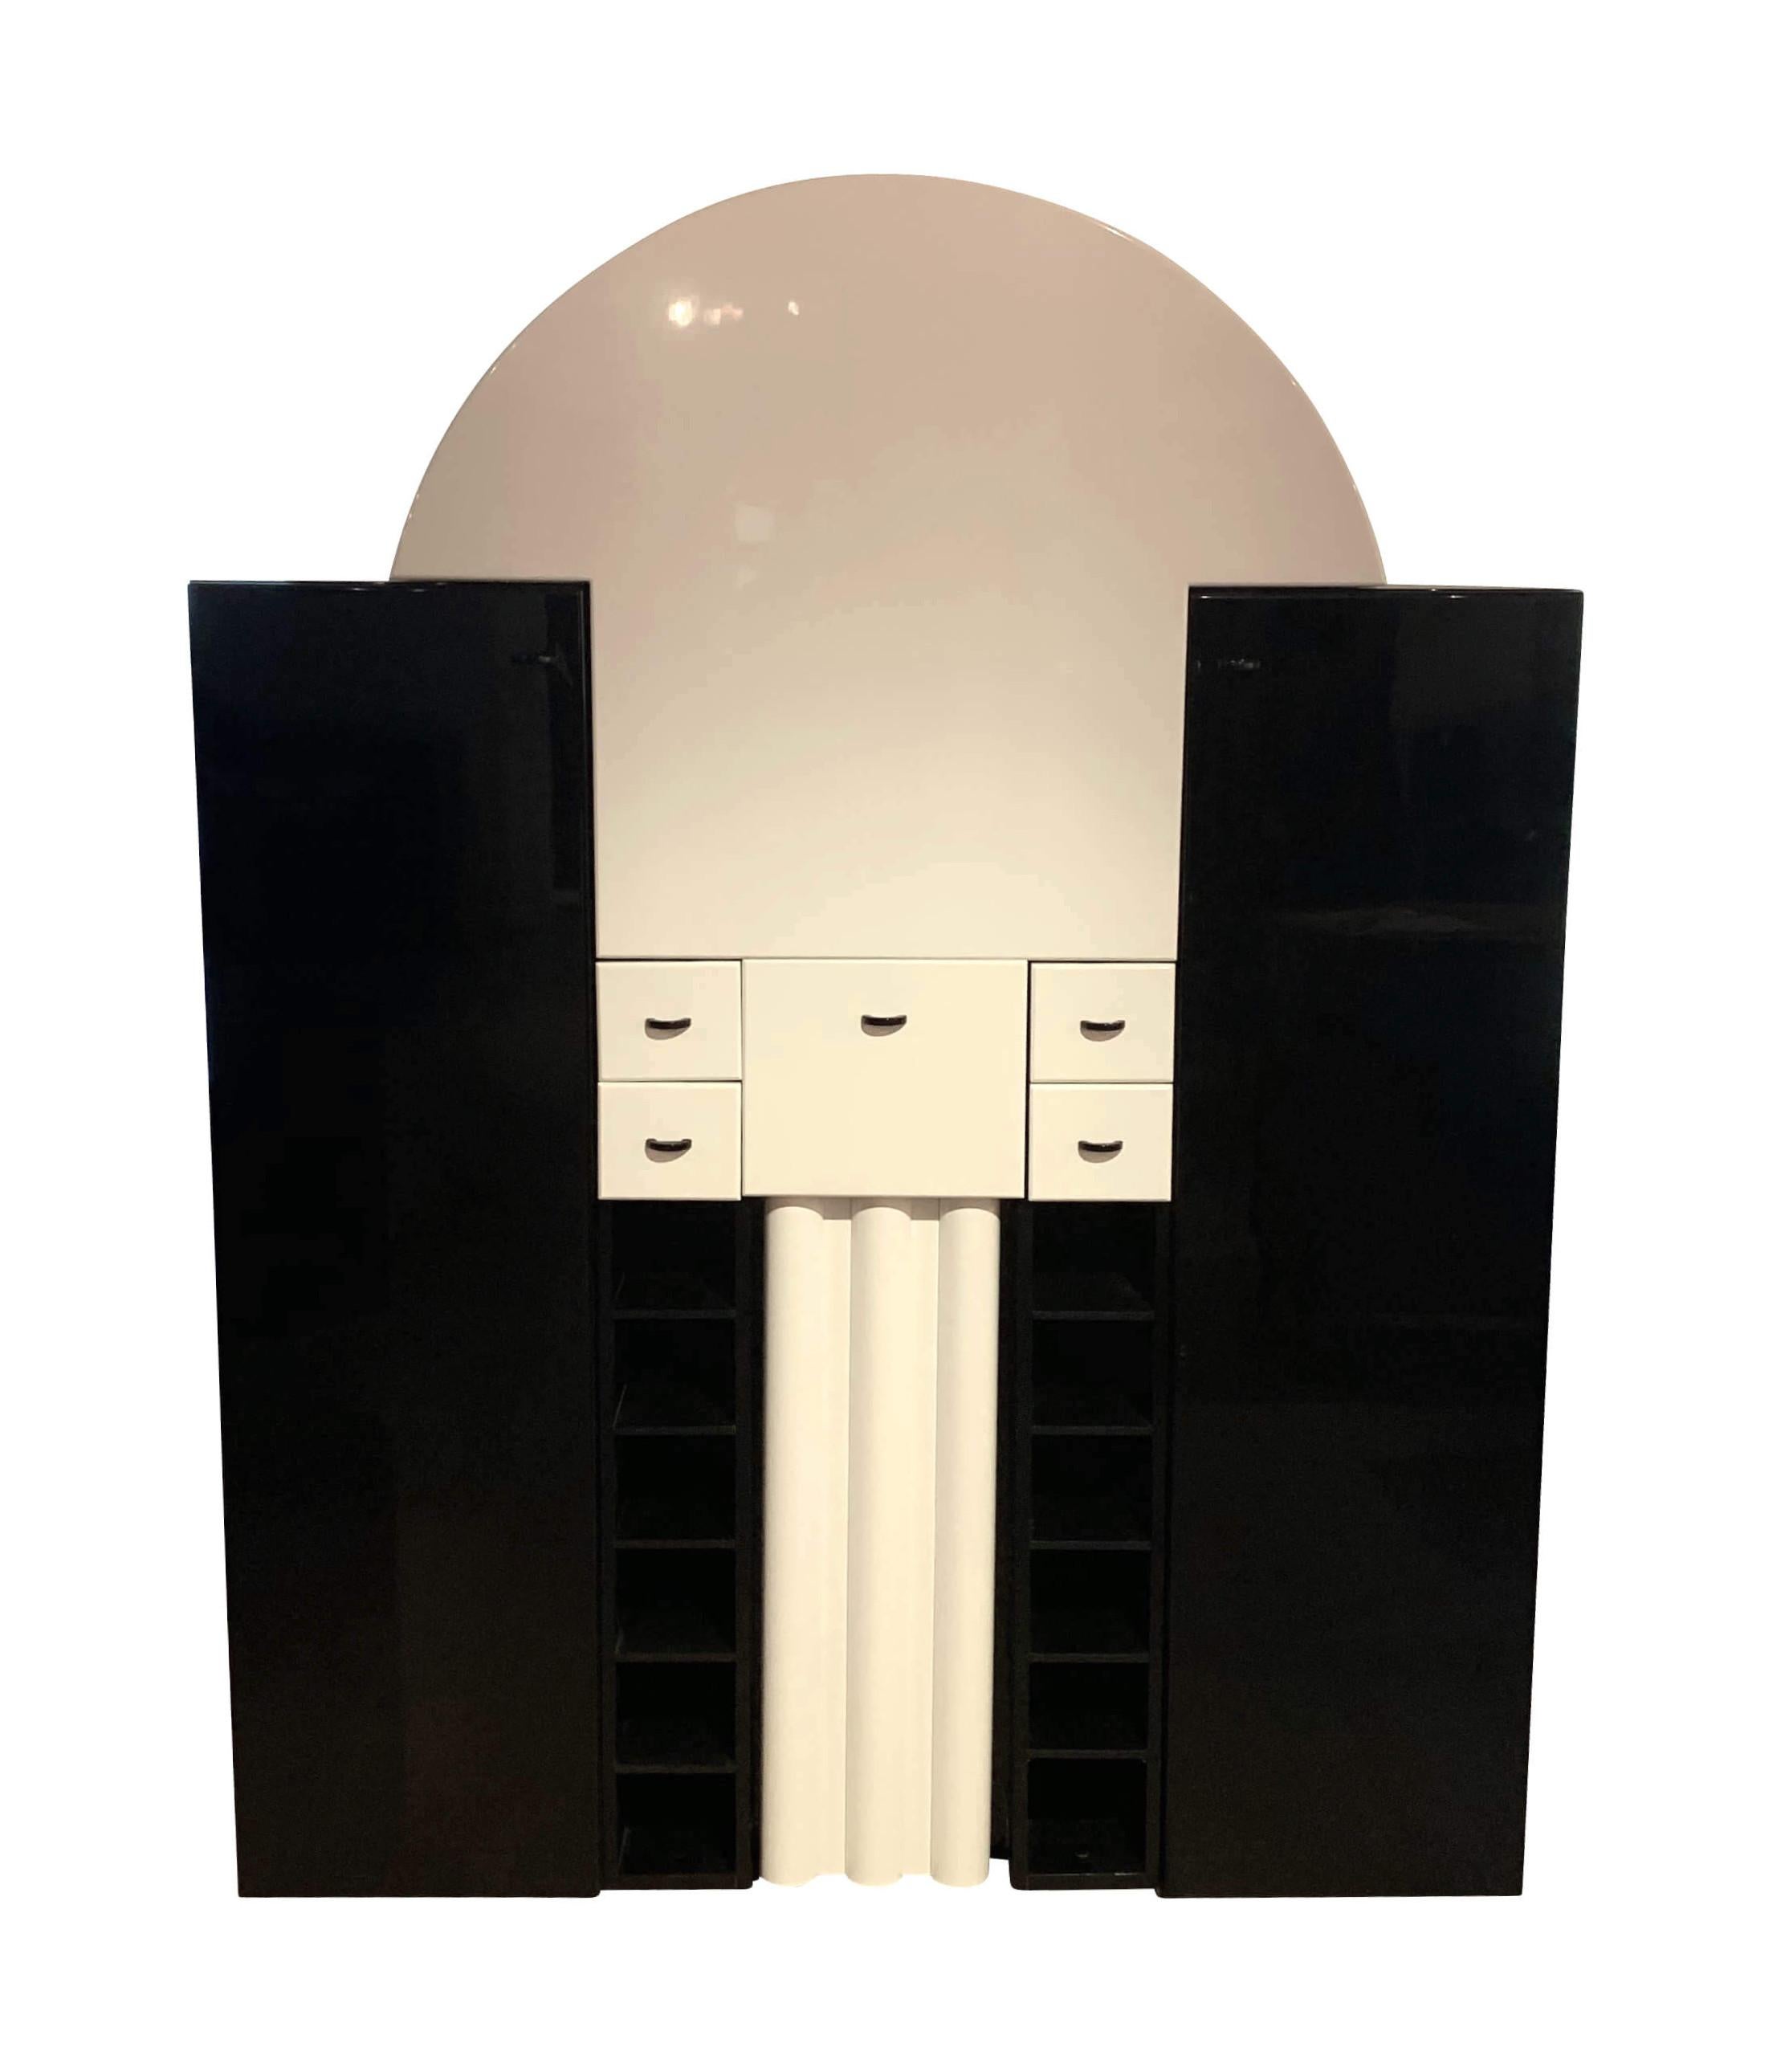 Extravagant bar cabinet from German Manufacturer Interlübke, produced in the 1970s.

Expandable shelf plate, which can be either horizontally folded down on a pull-out column on rolls or attached vertically hold by magnets.

Inside the top arc,